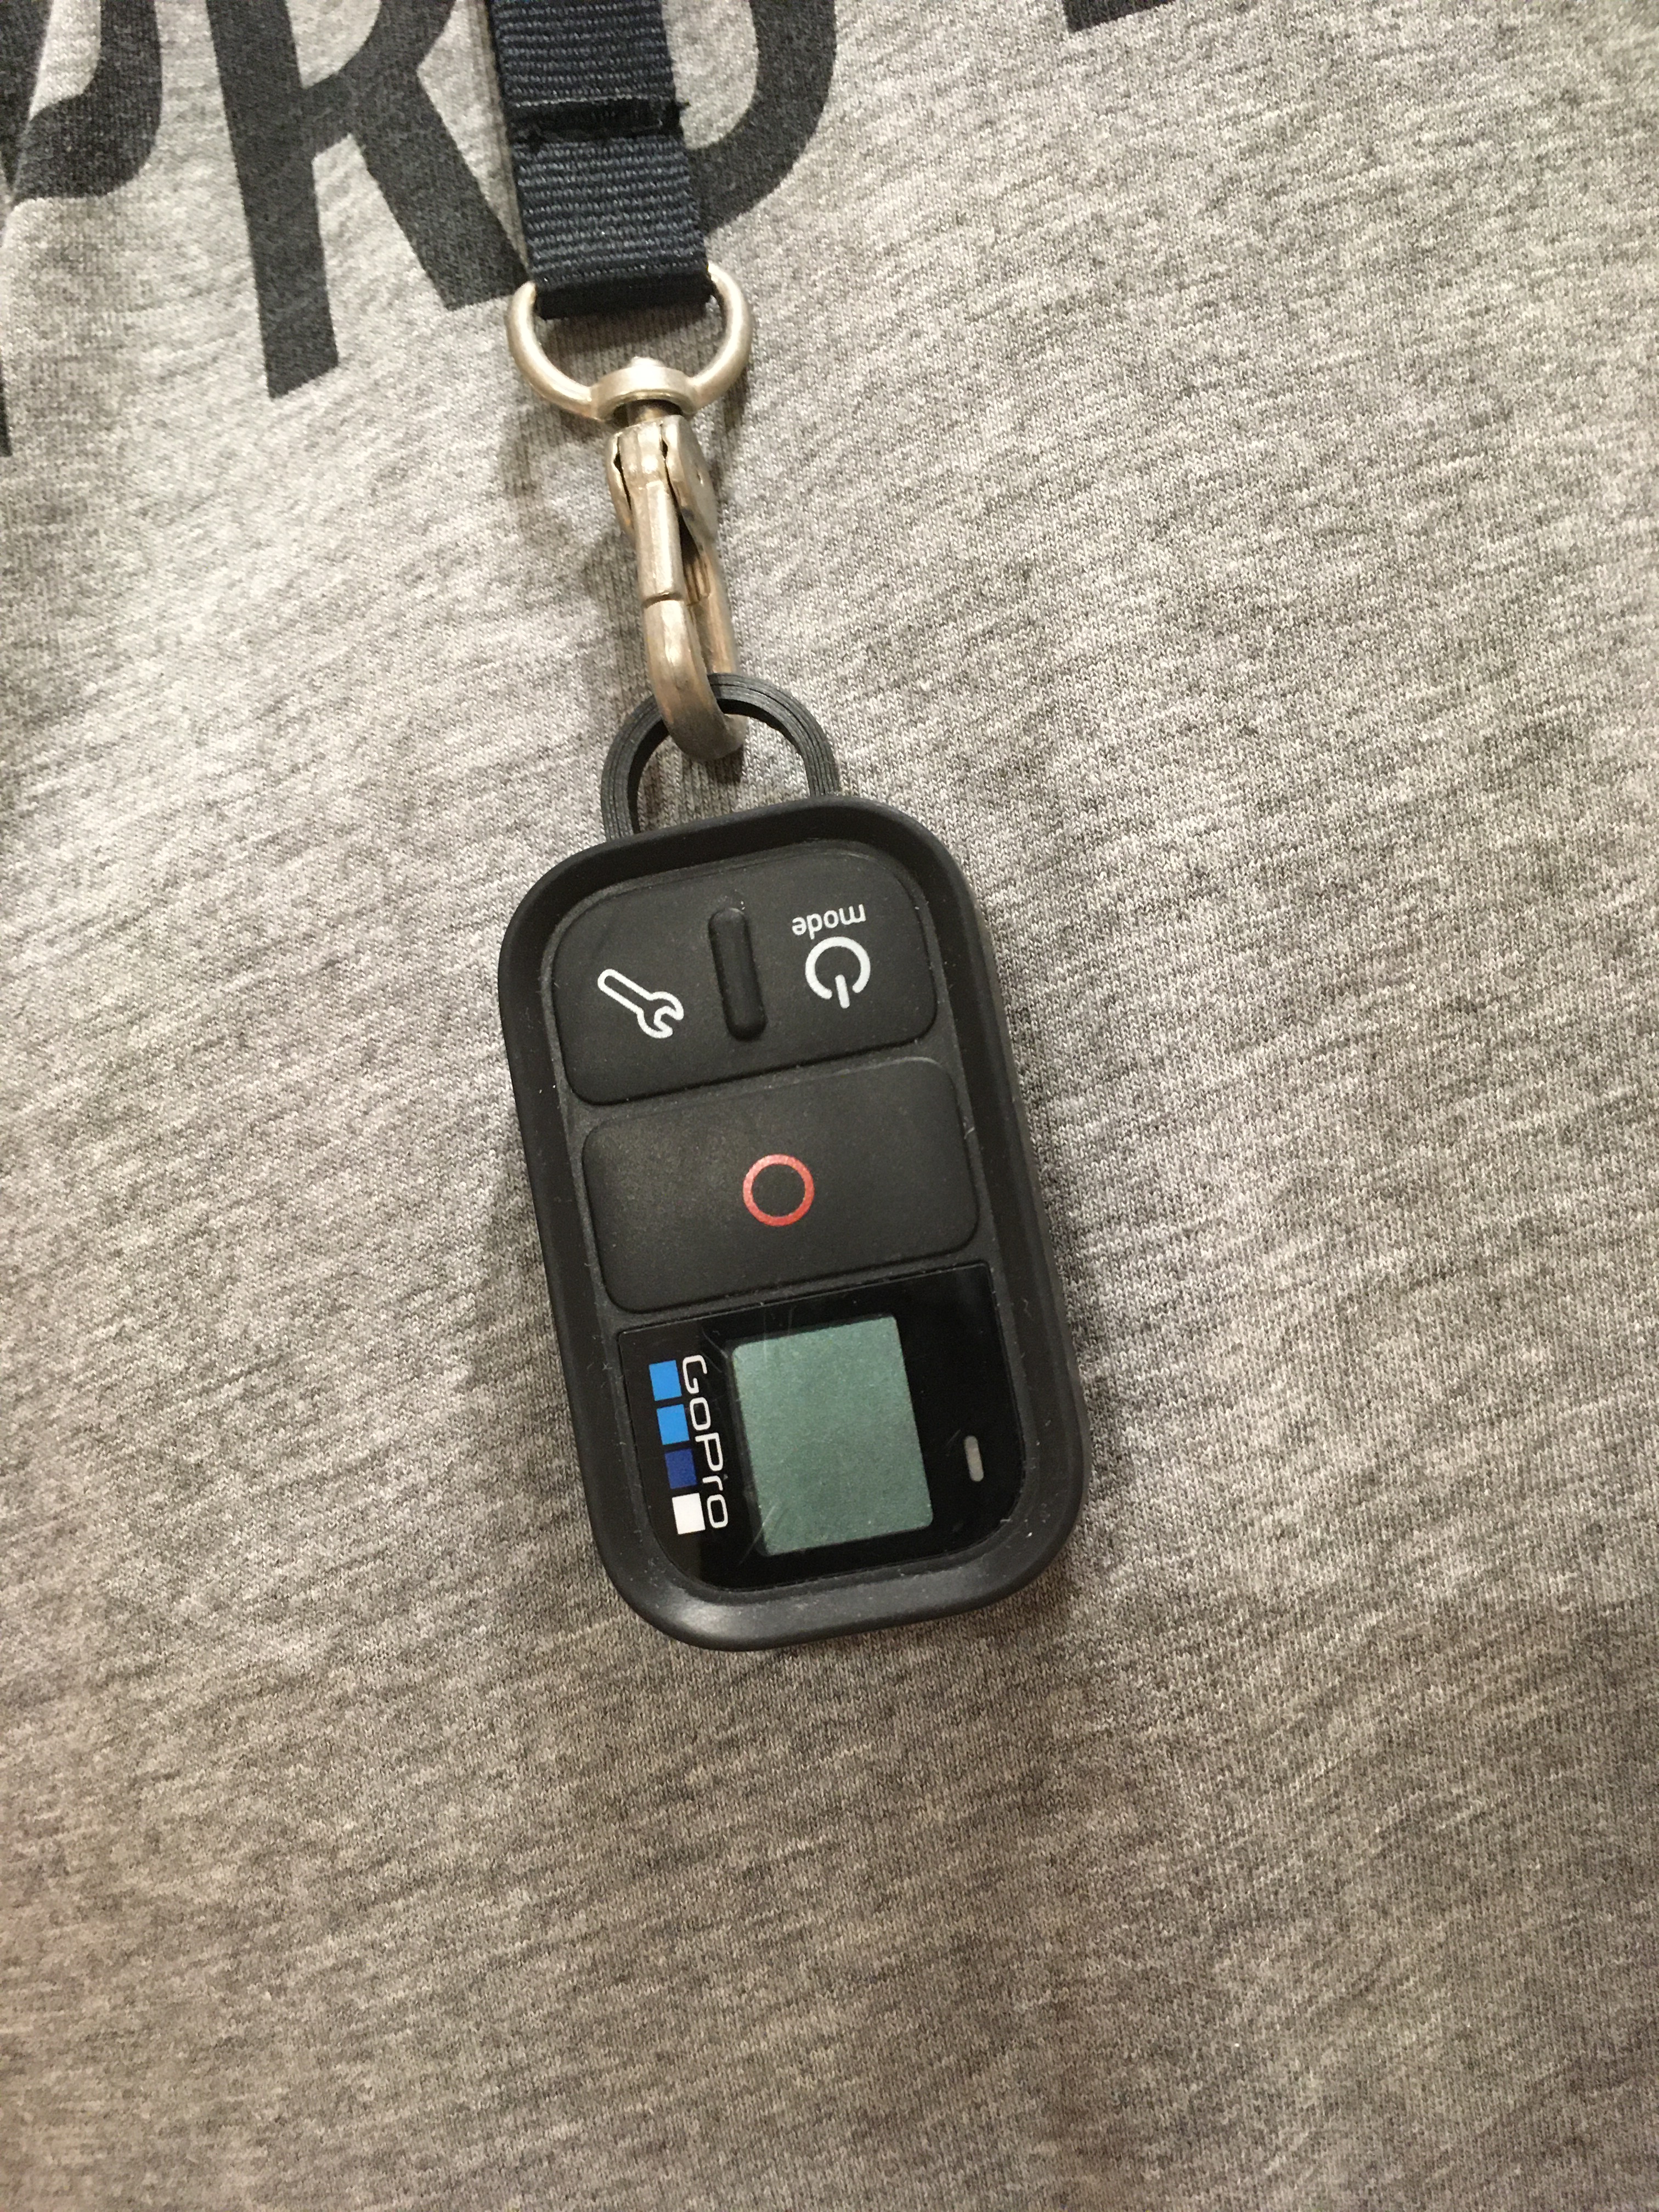 GoPro Wifi-remote connection on keys